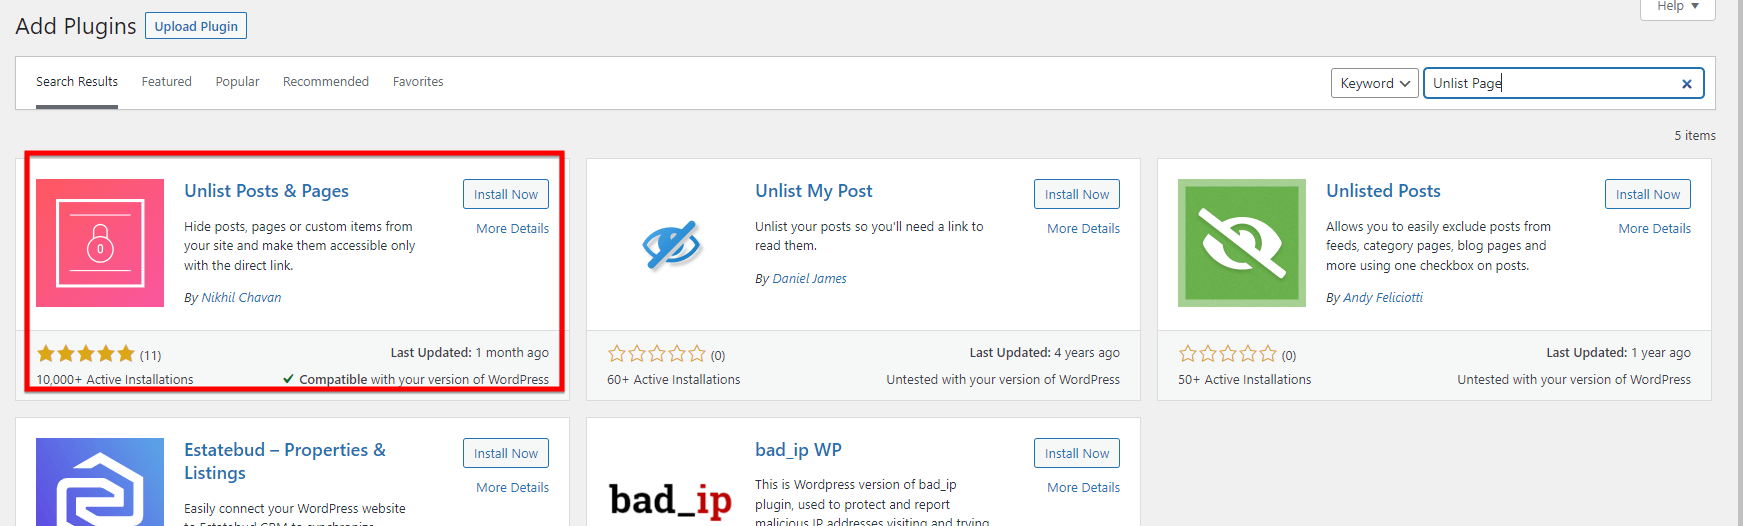 Unlist Posts And Pages Plugin